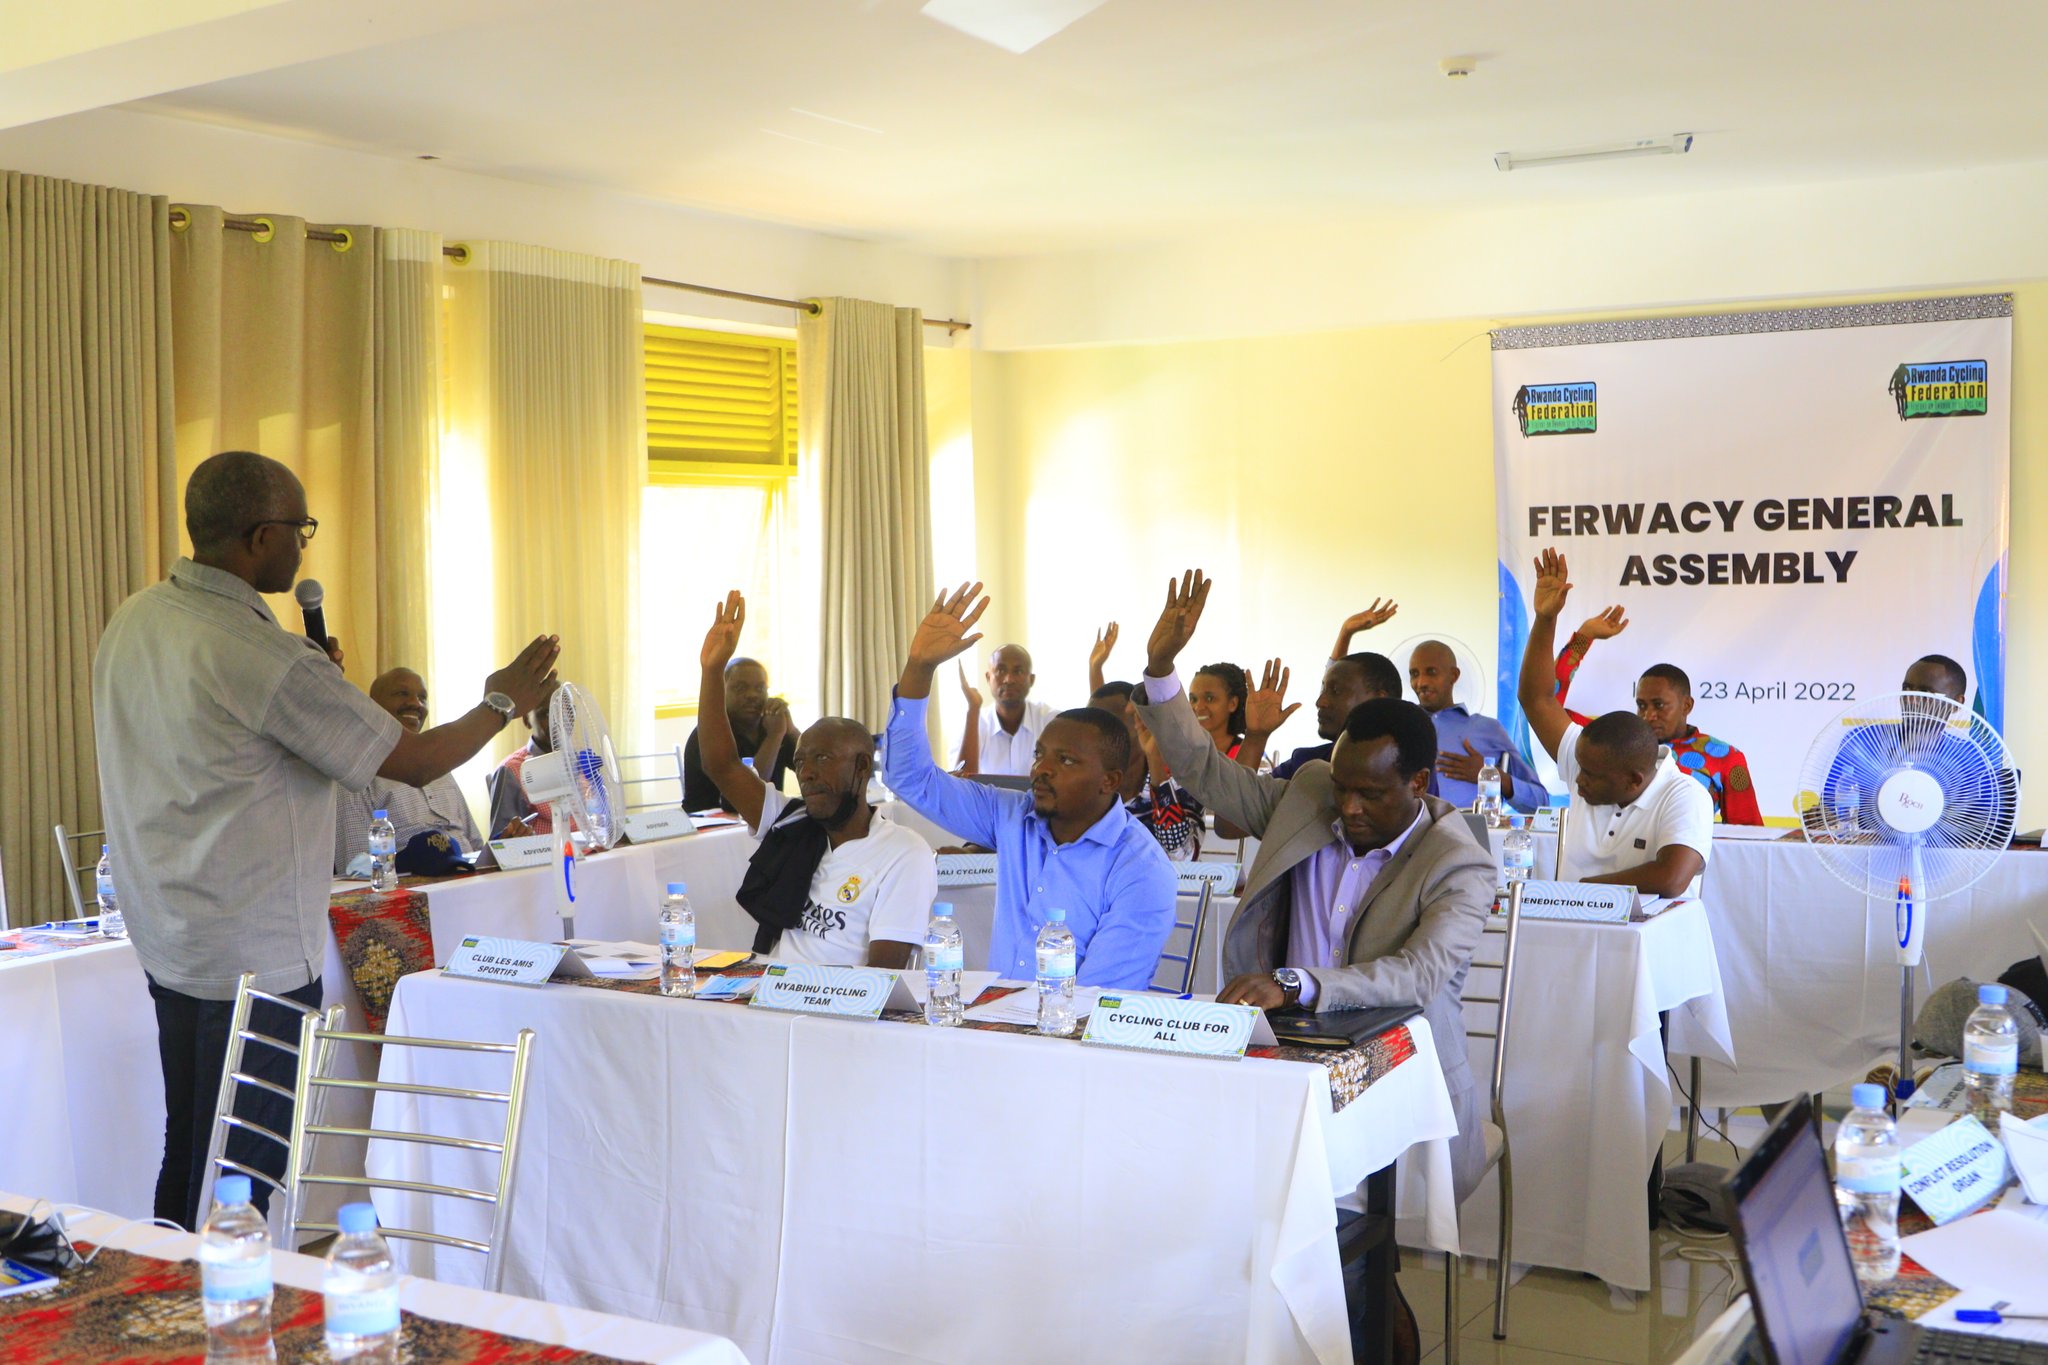 Members of FERWACY general assembly vote the date on which elections will take place. Courtesy